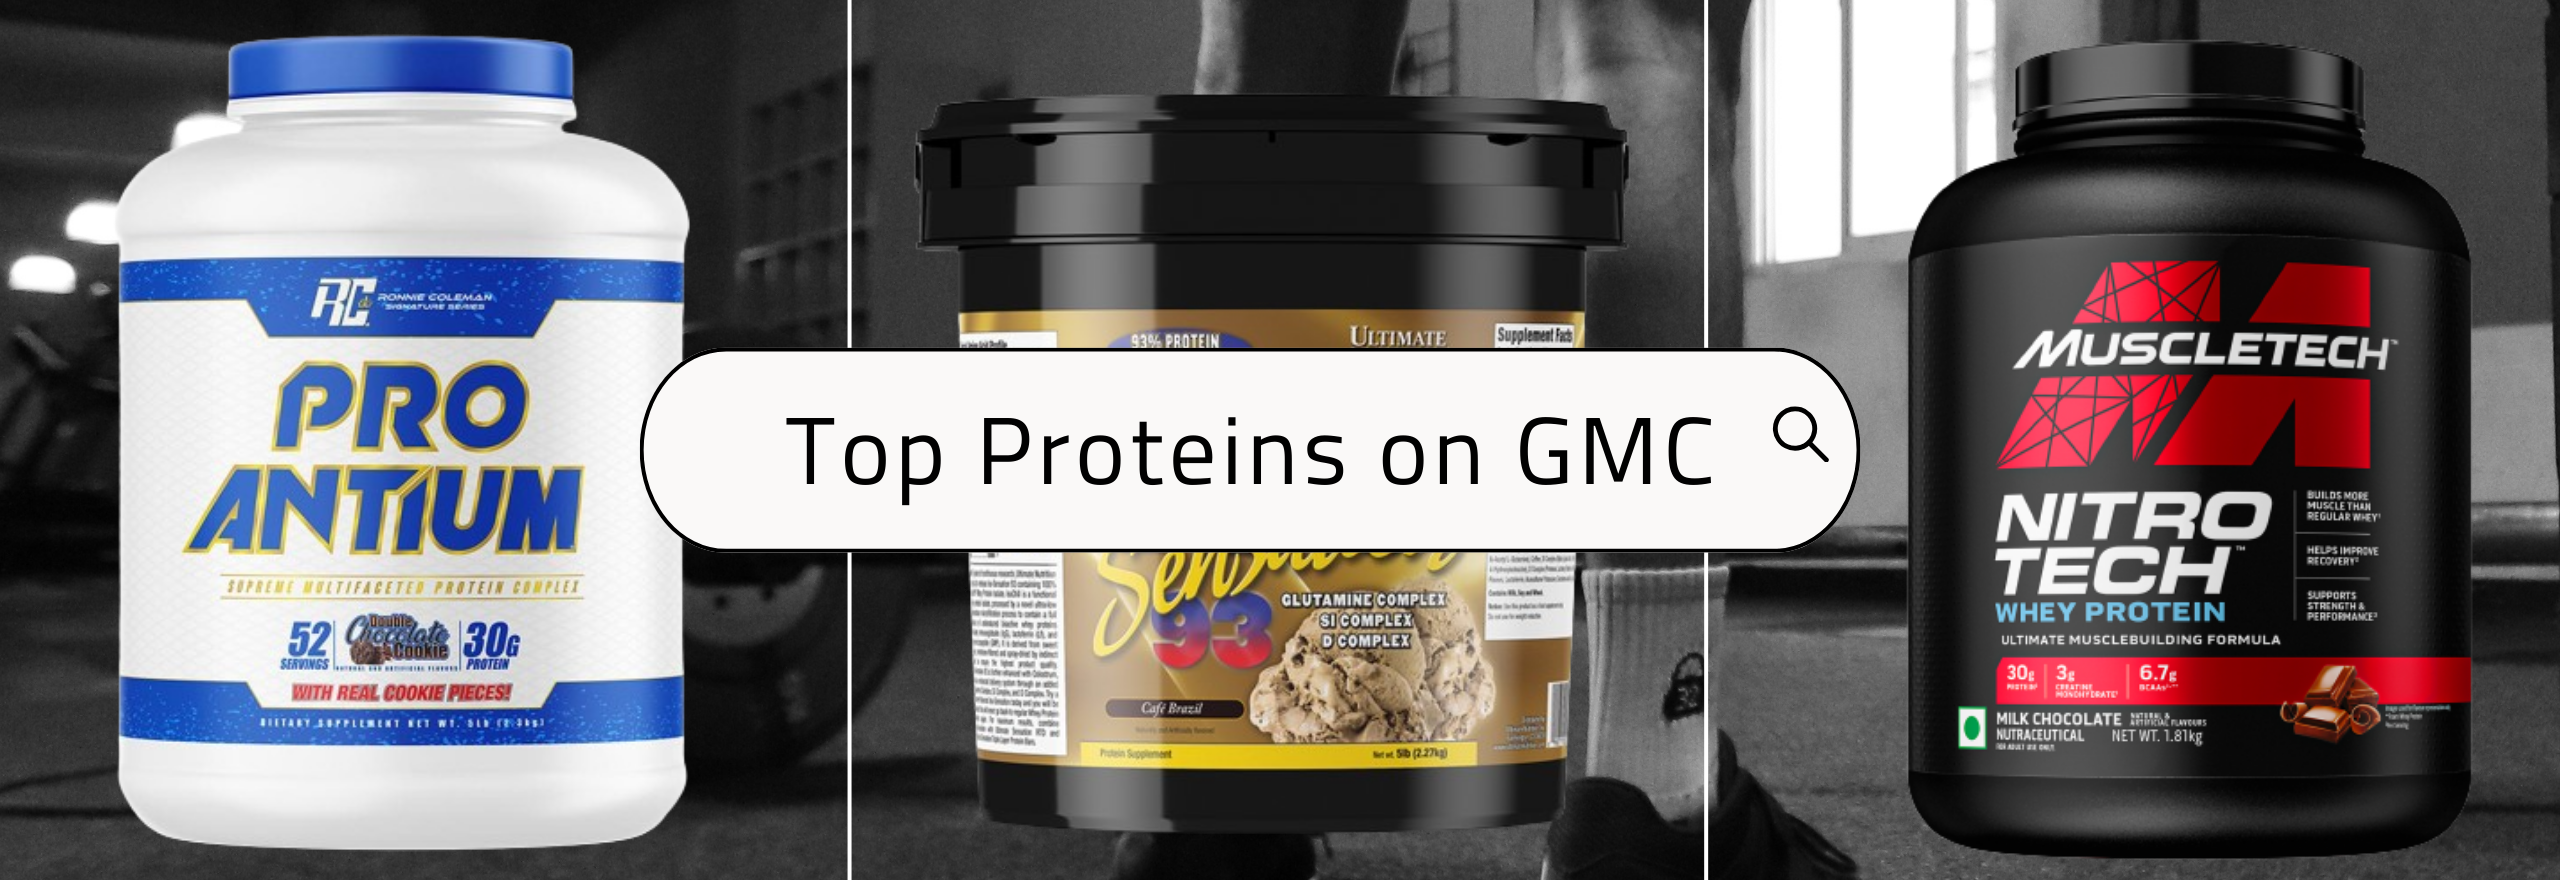 Top Protein